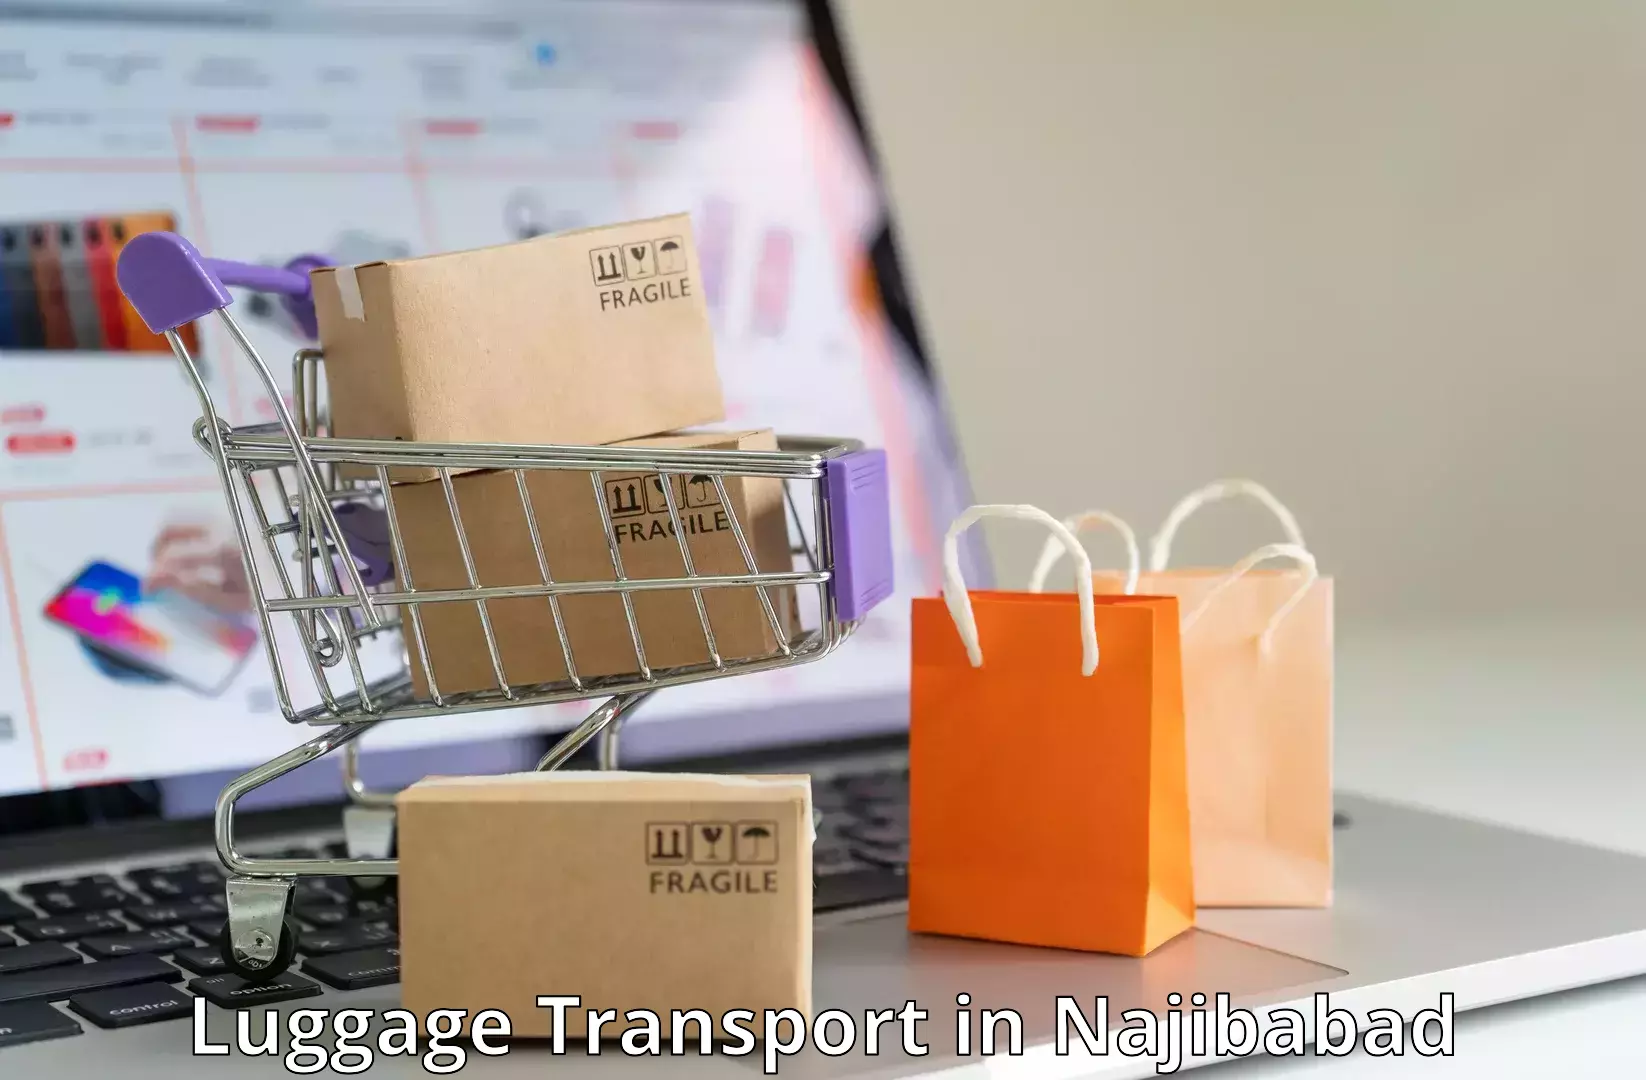 Luggage shipping specialists in Najibabad